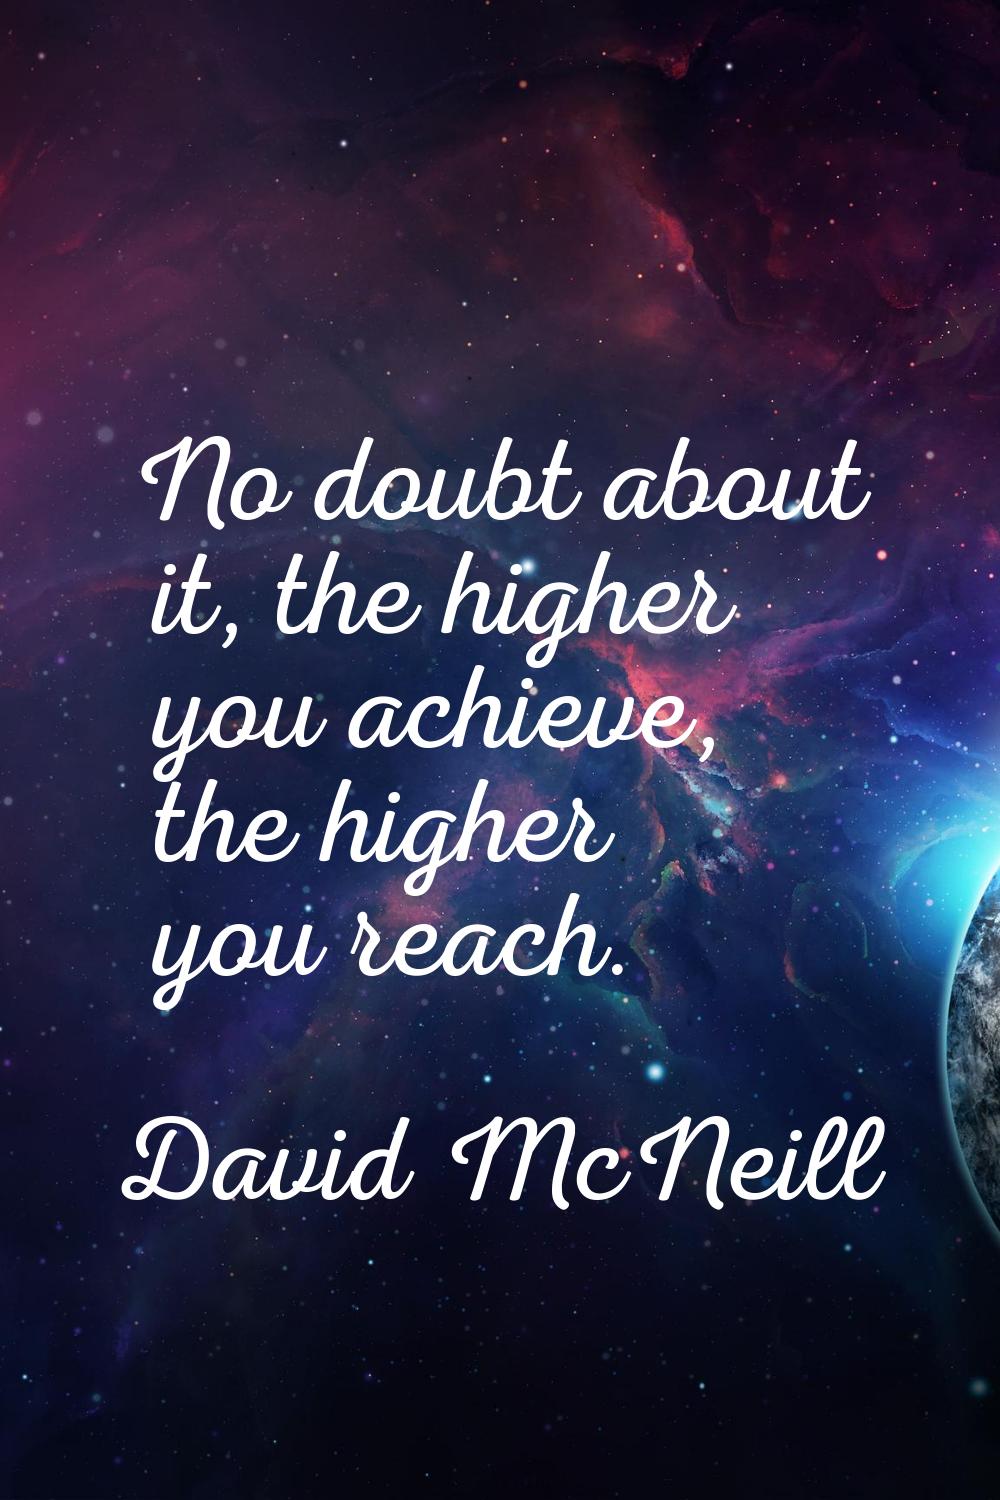 No doubt about it, the higher you achieve, the higher you reach.